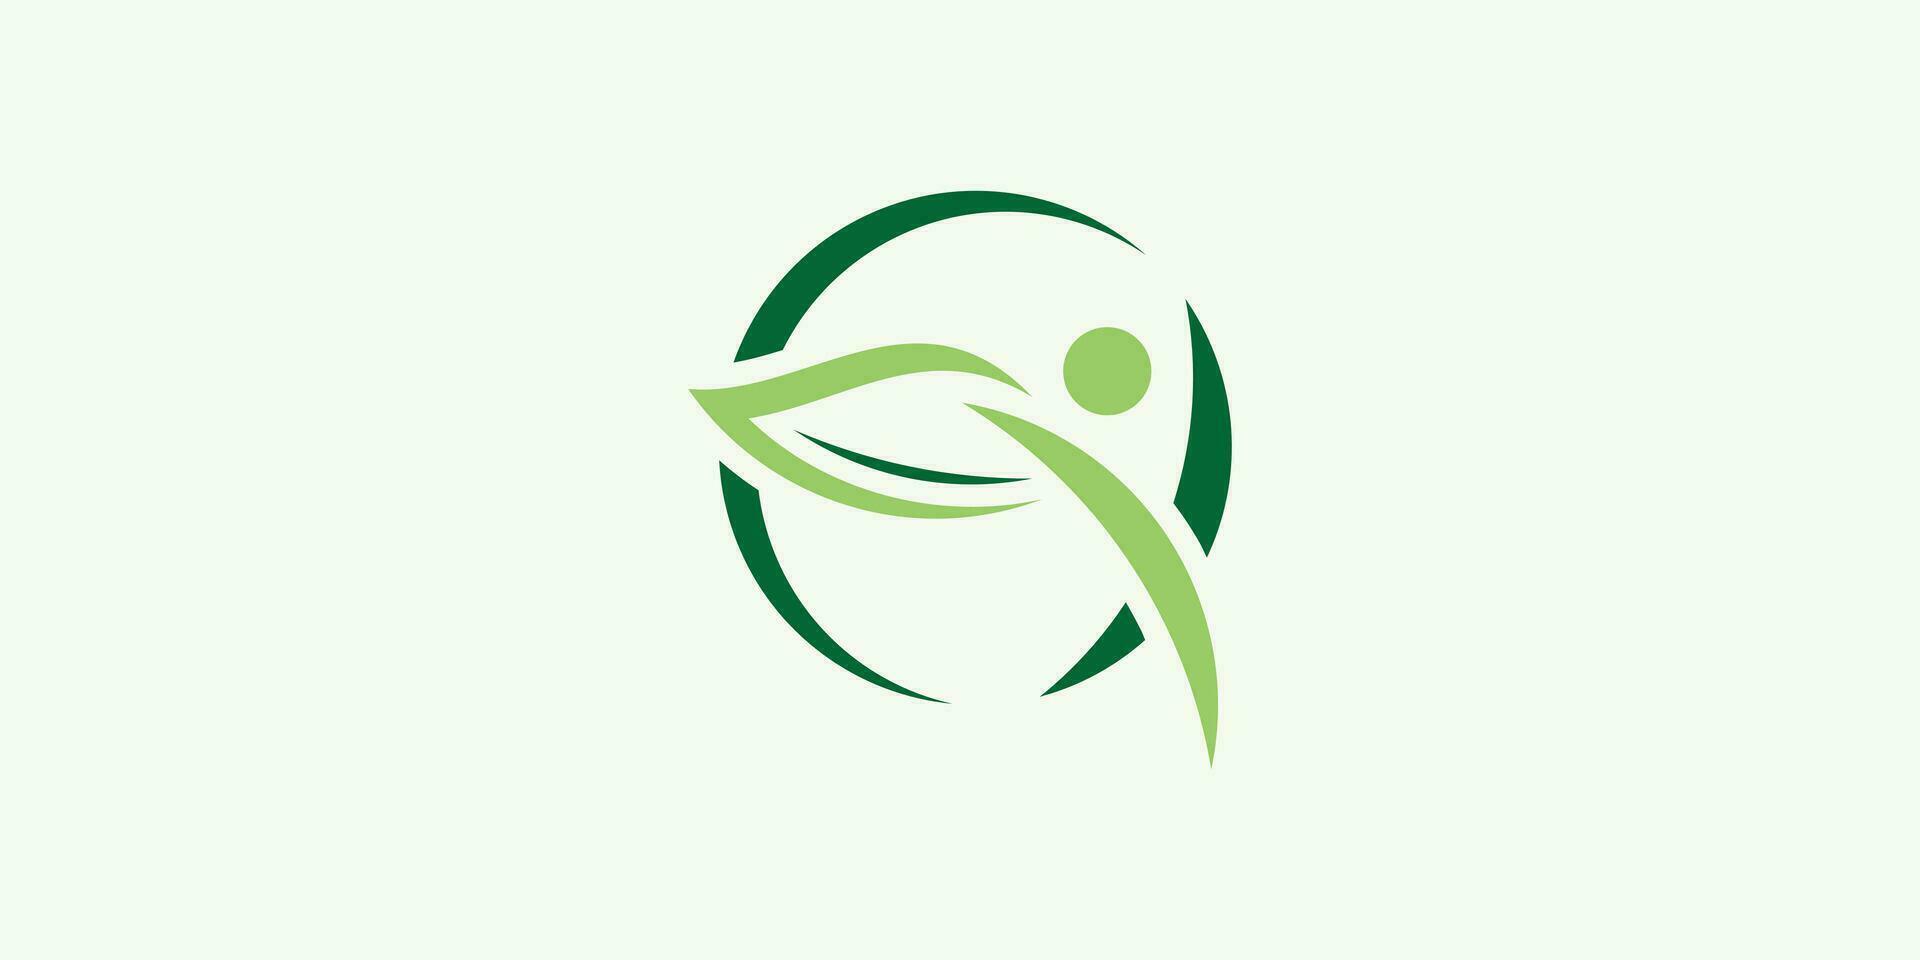 wellness logo design with people and leaf elements inside a circle. vector